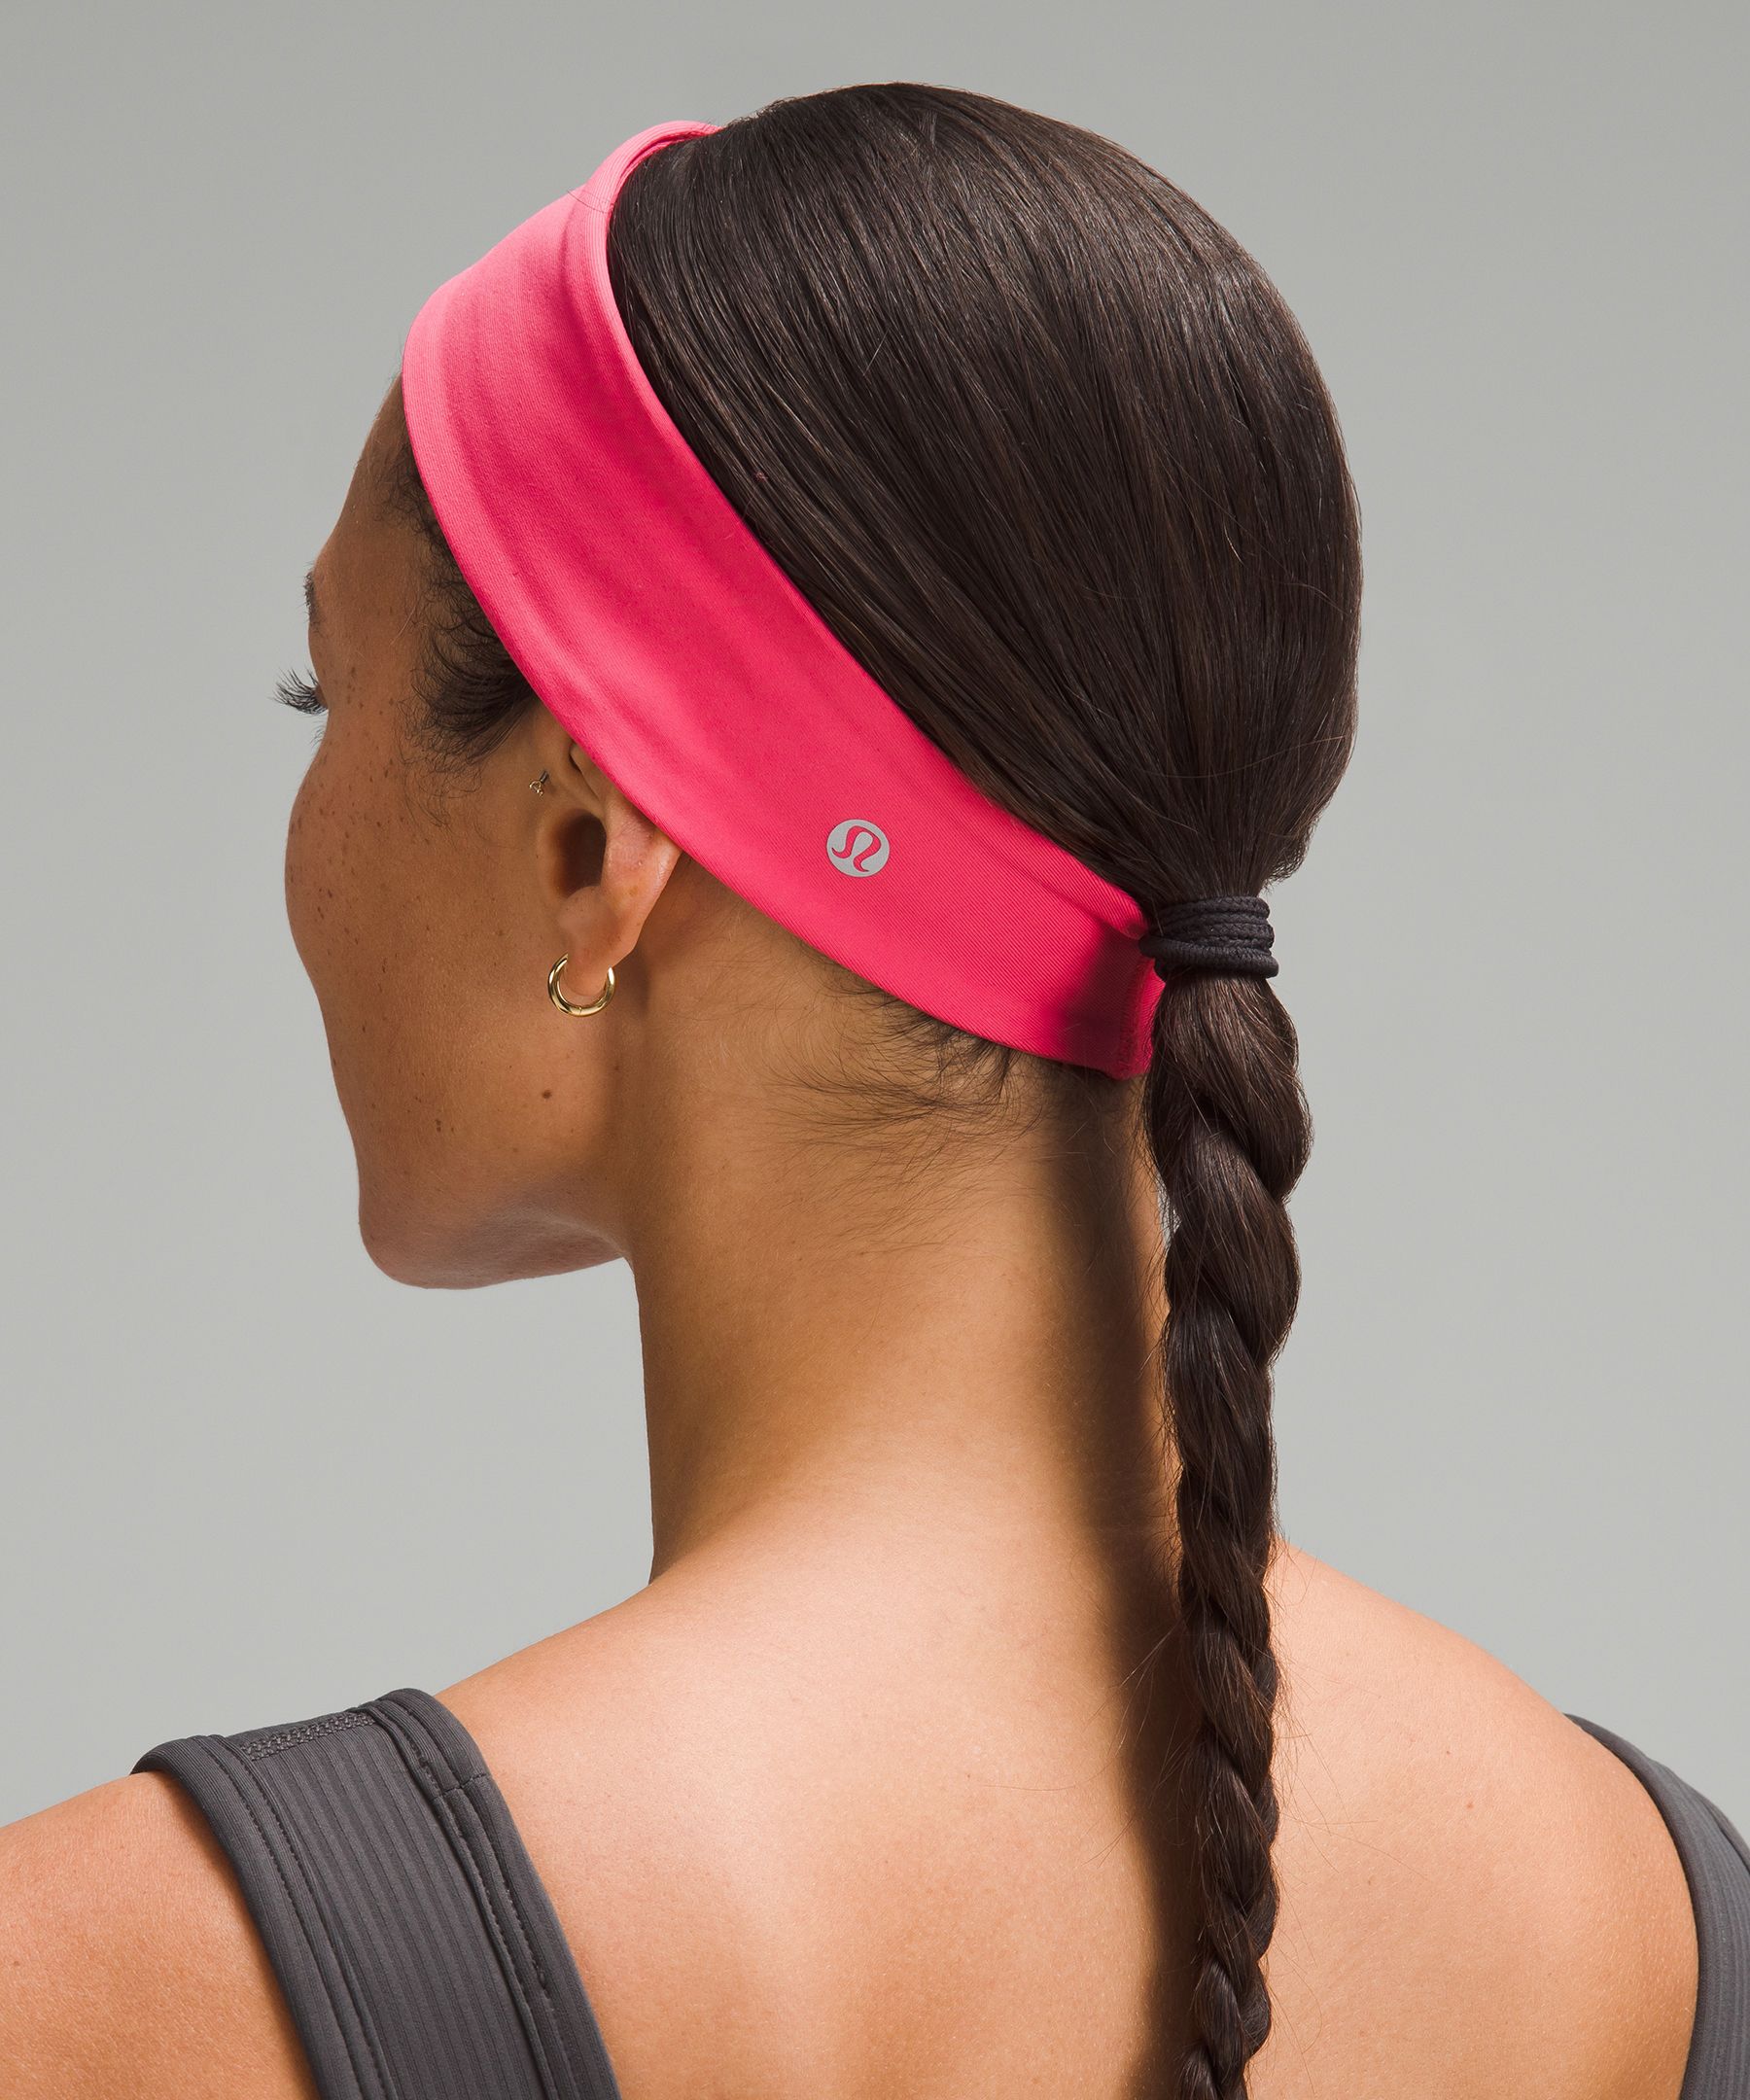 Lululemon Headbands in All Colors - $12 Each or $130 for All